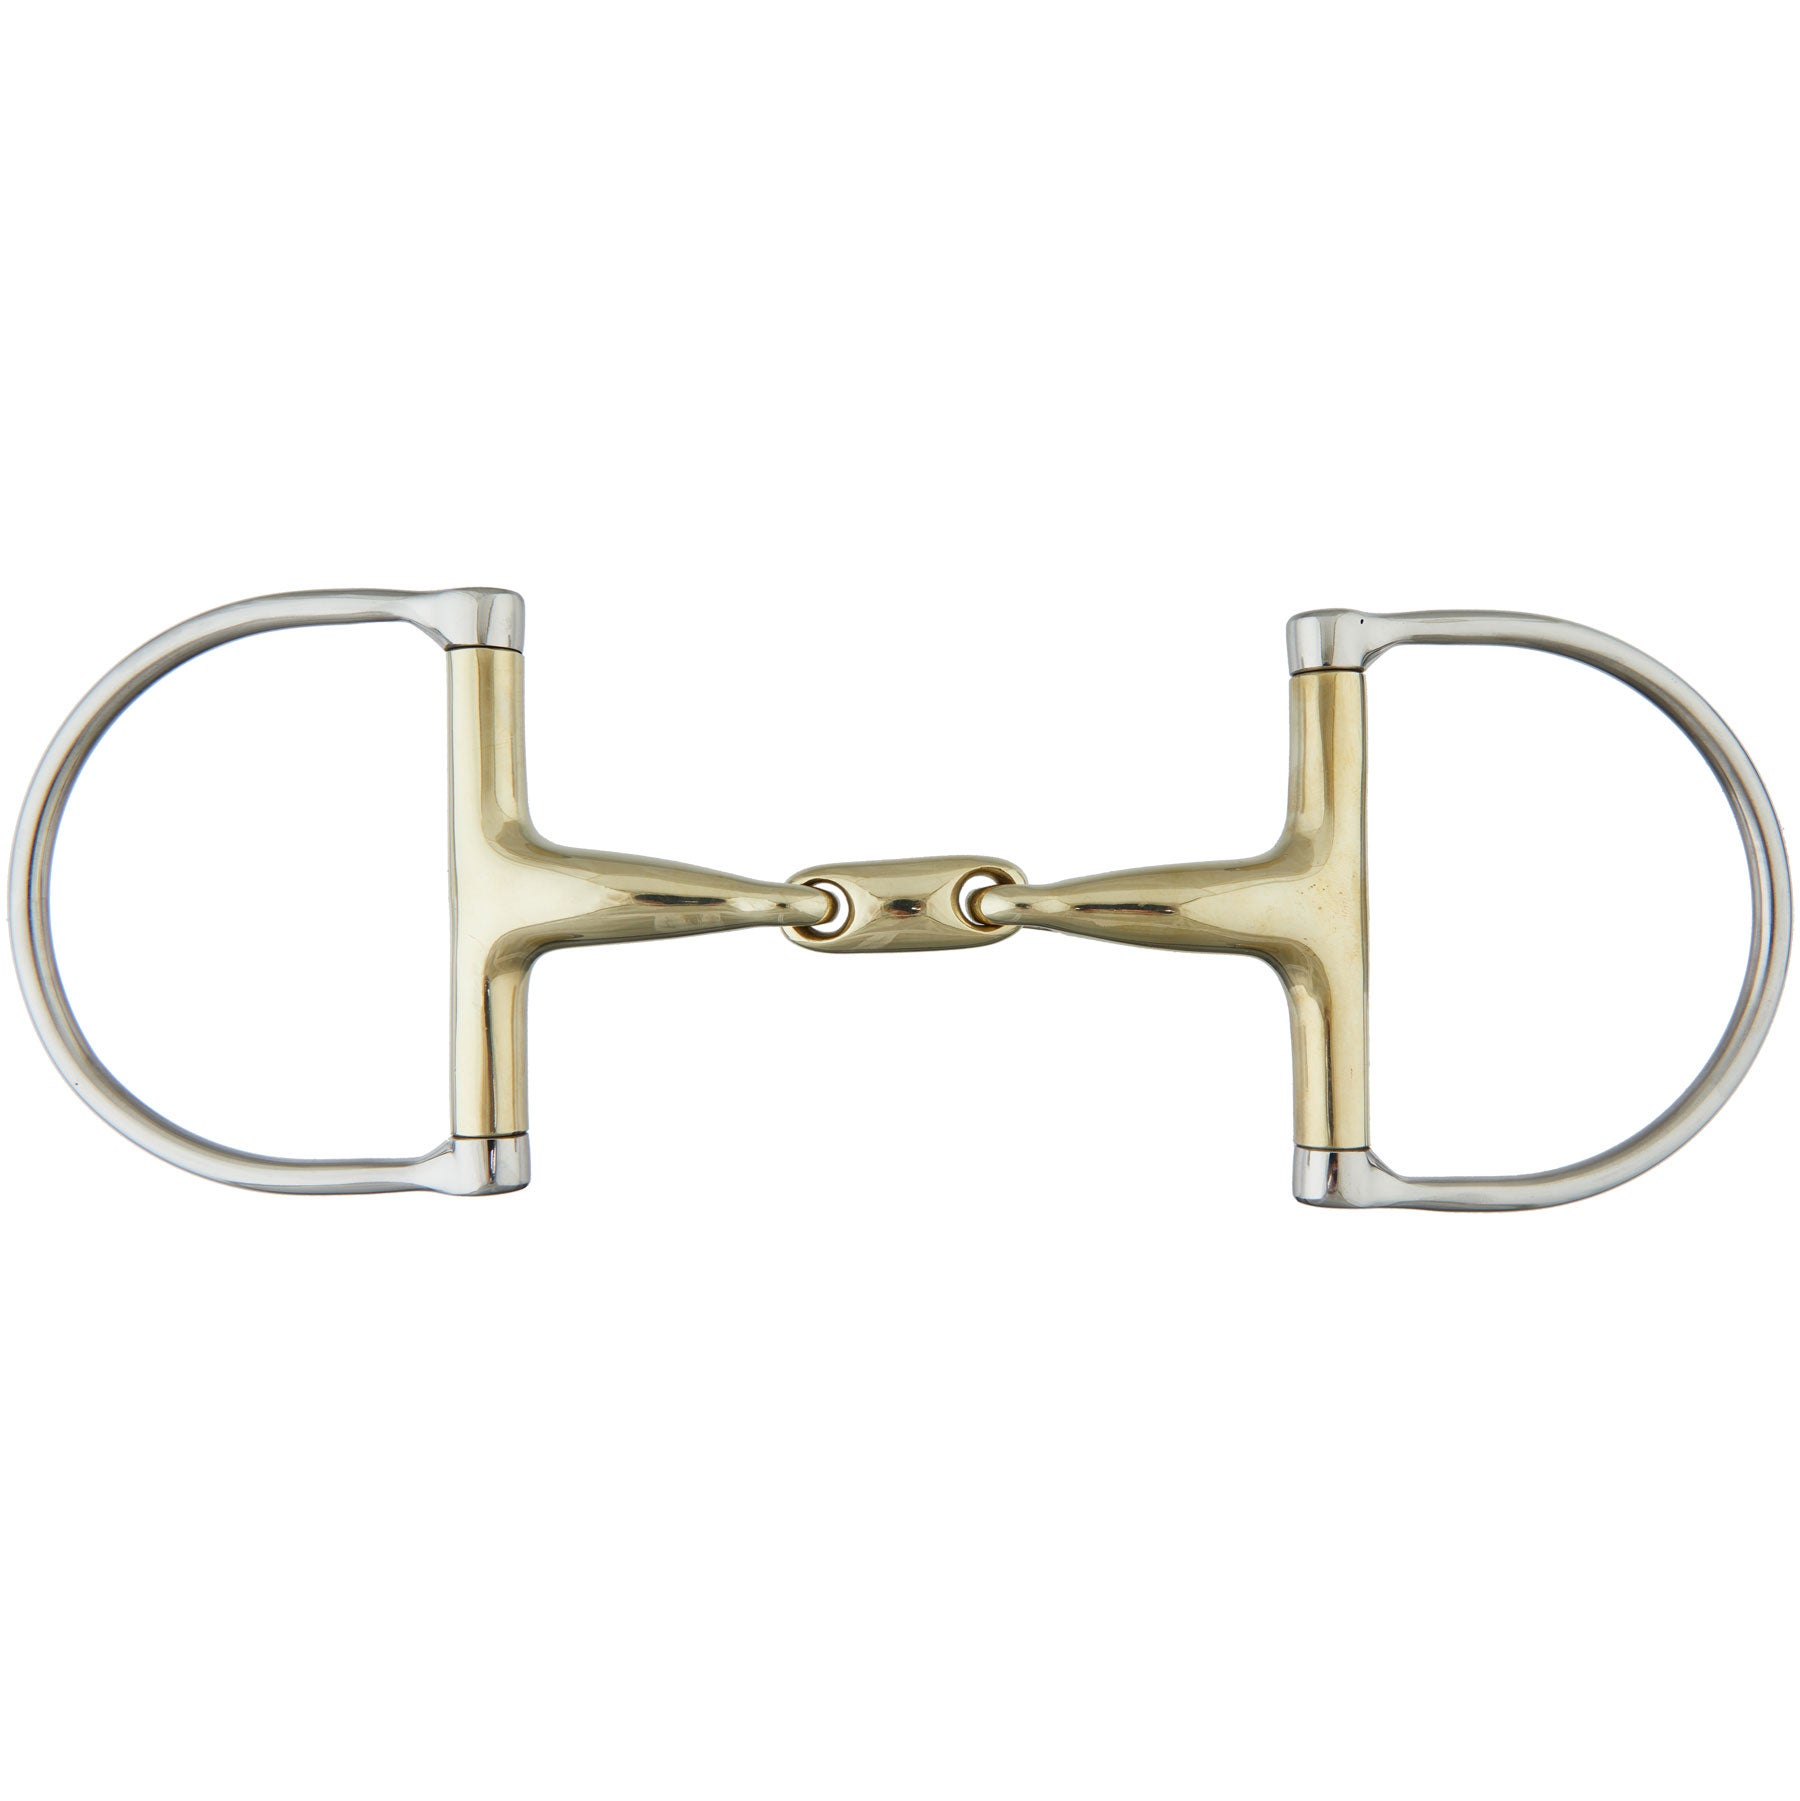 Wild Things Sterling Silver D-Ring Snaffle Bit Bangle Diameter 2.5 Inches